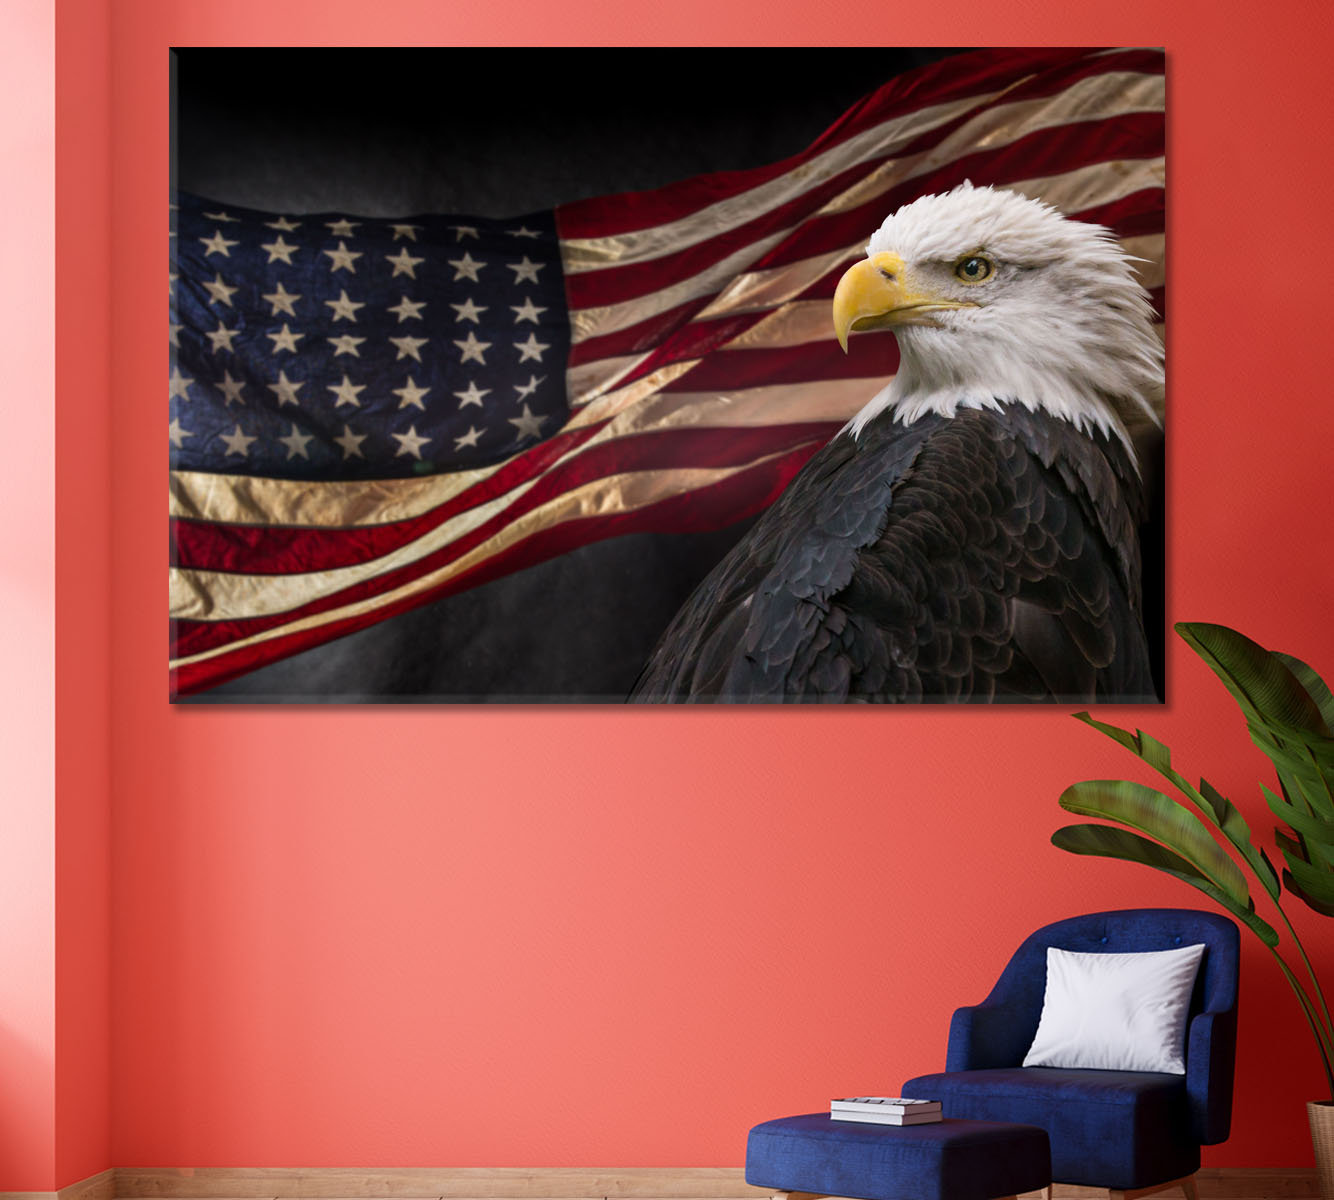 Powerful America Patriotic Symbols Bald Eagle Poster Posters, Flags Giclee Print Artesty 1 panel 24" x 16" 